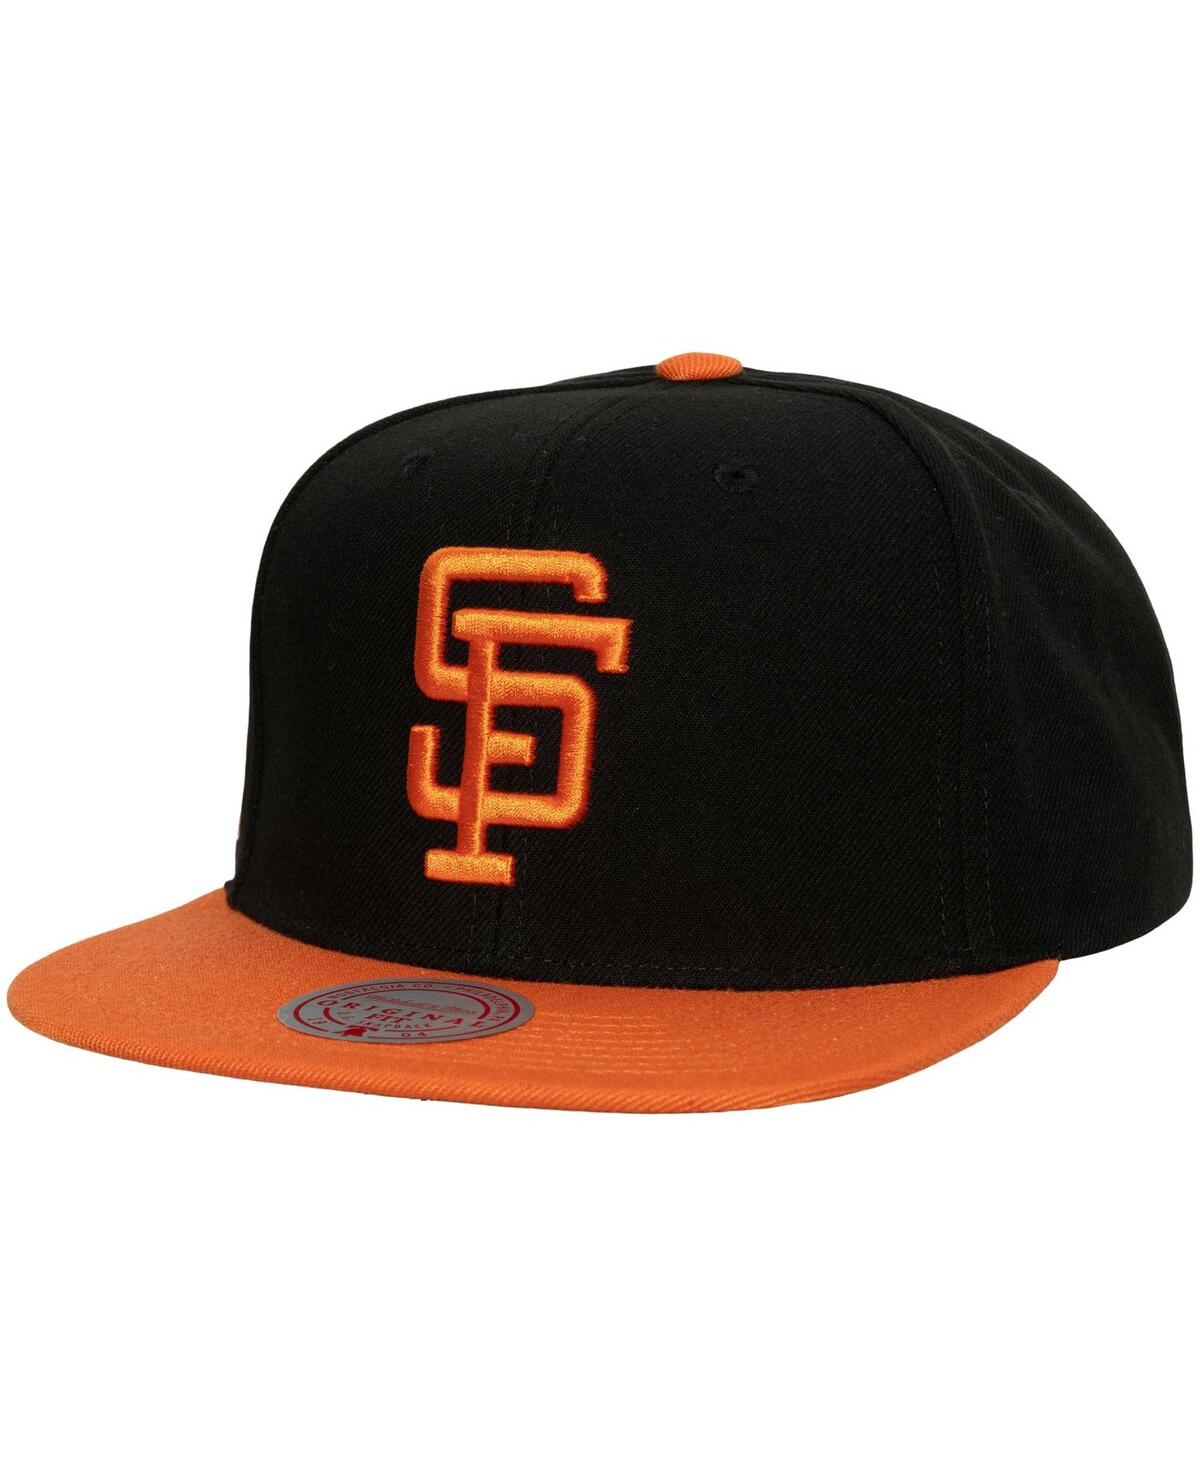 Mitchell & Ness Men's  Black San Francisco Giants Cooperstown Collection Evergreen Snapback Hat